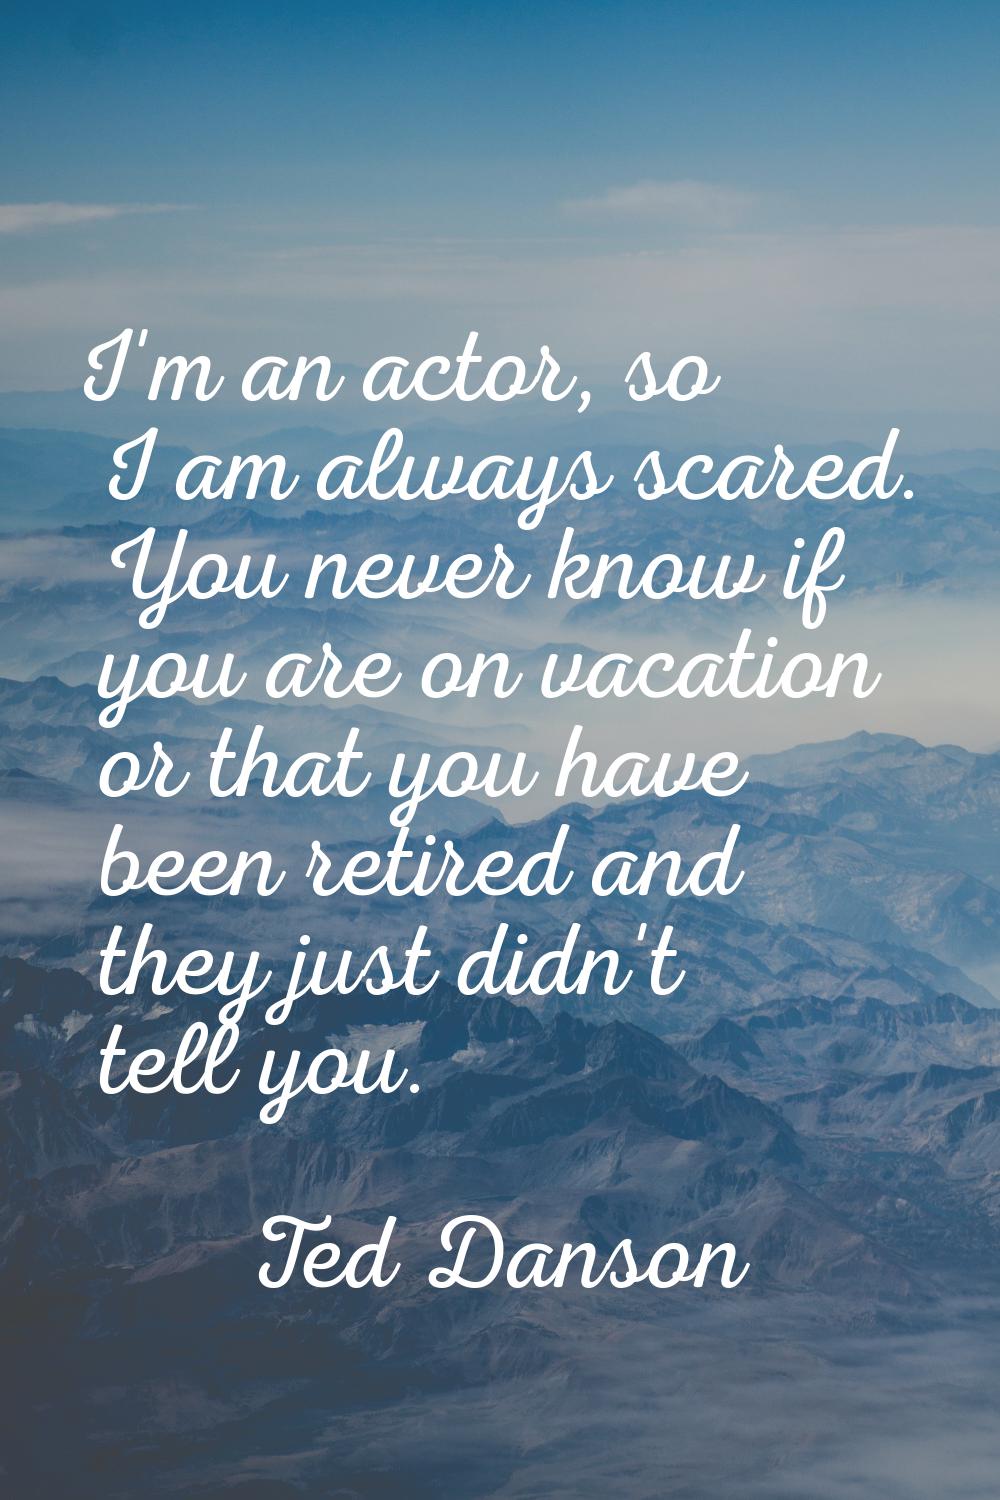 I'm an actor, so I am always scared. You never know if you are on vacation or that you have been re